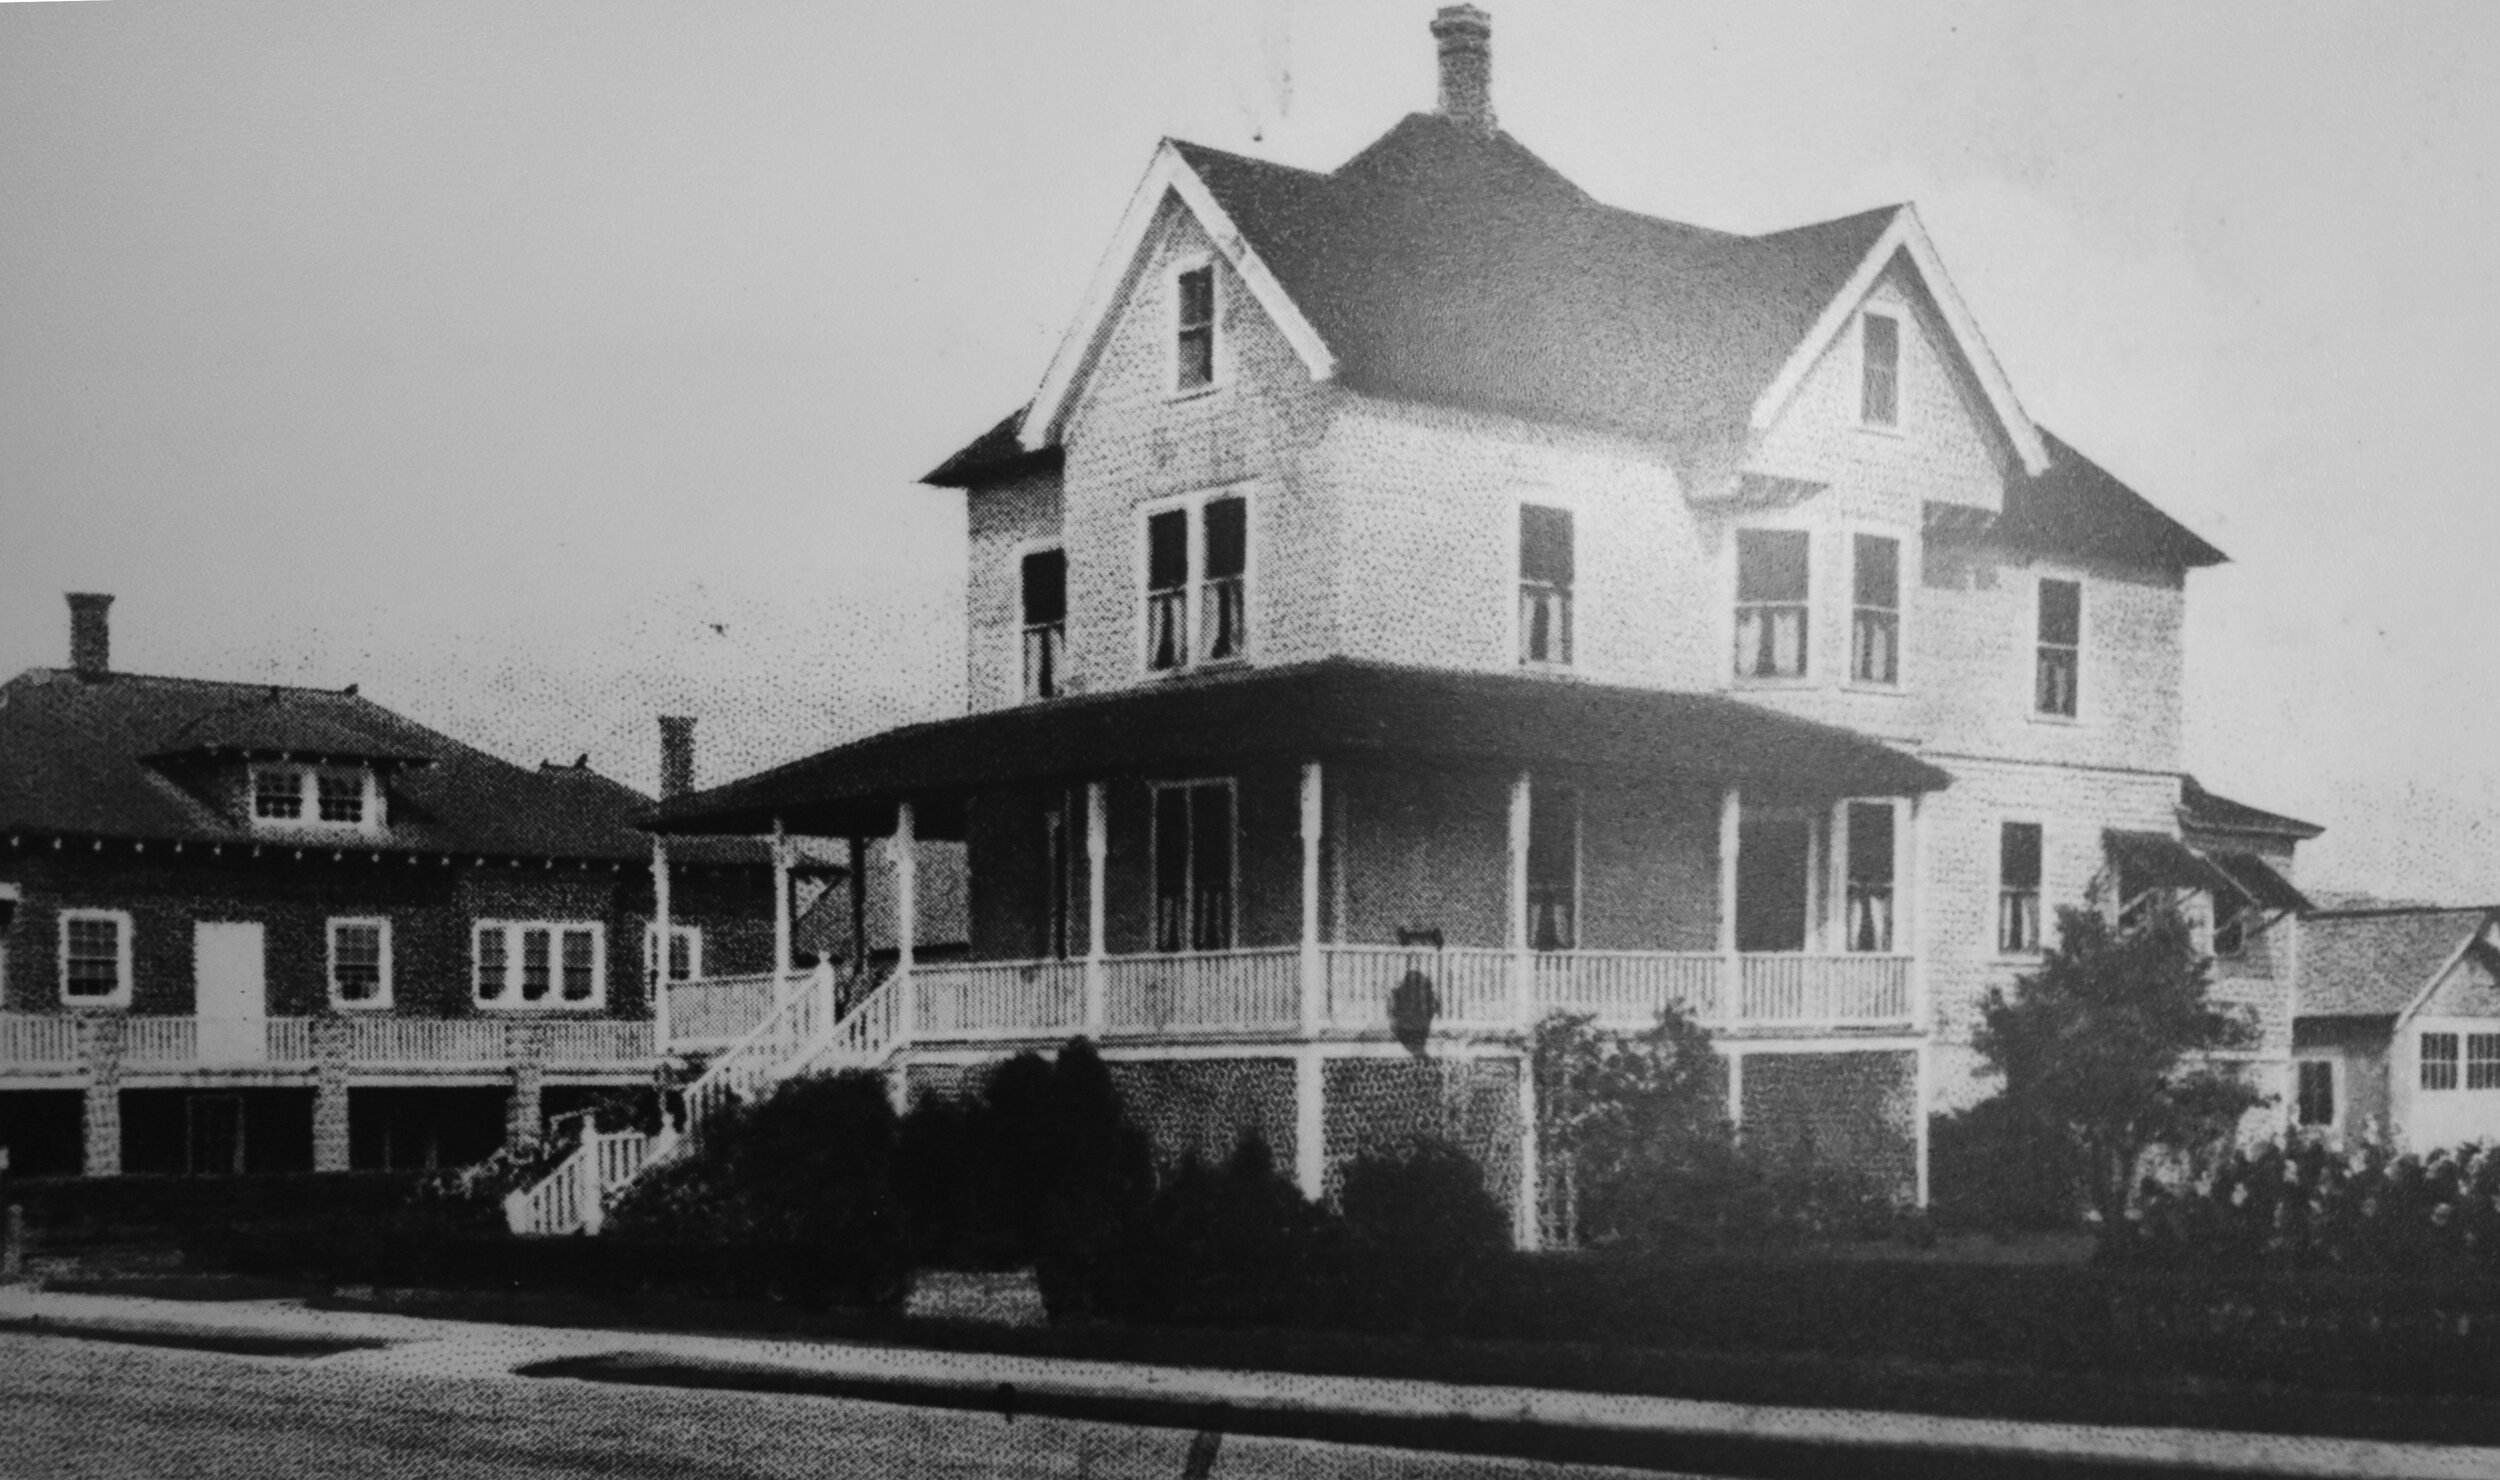 Cottage of Mrs. Geo. Anderson located at 46th Street, looking west from Boardwalk.